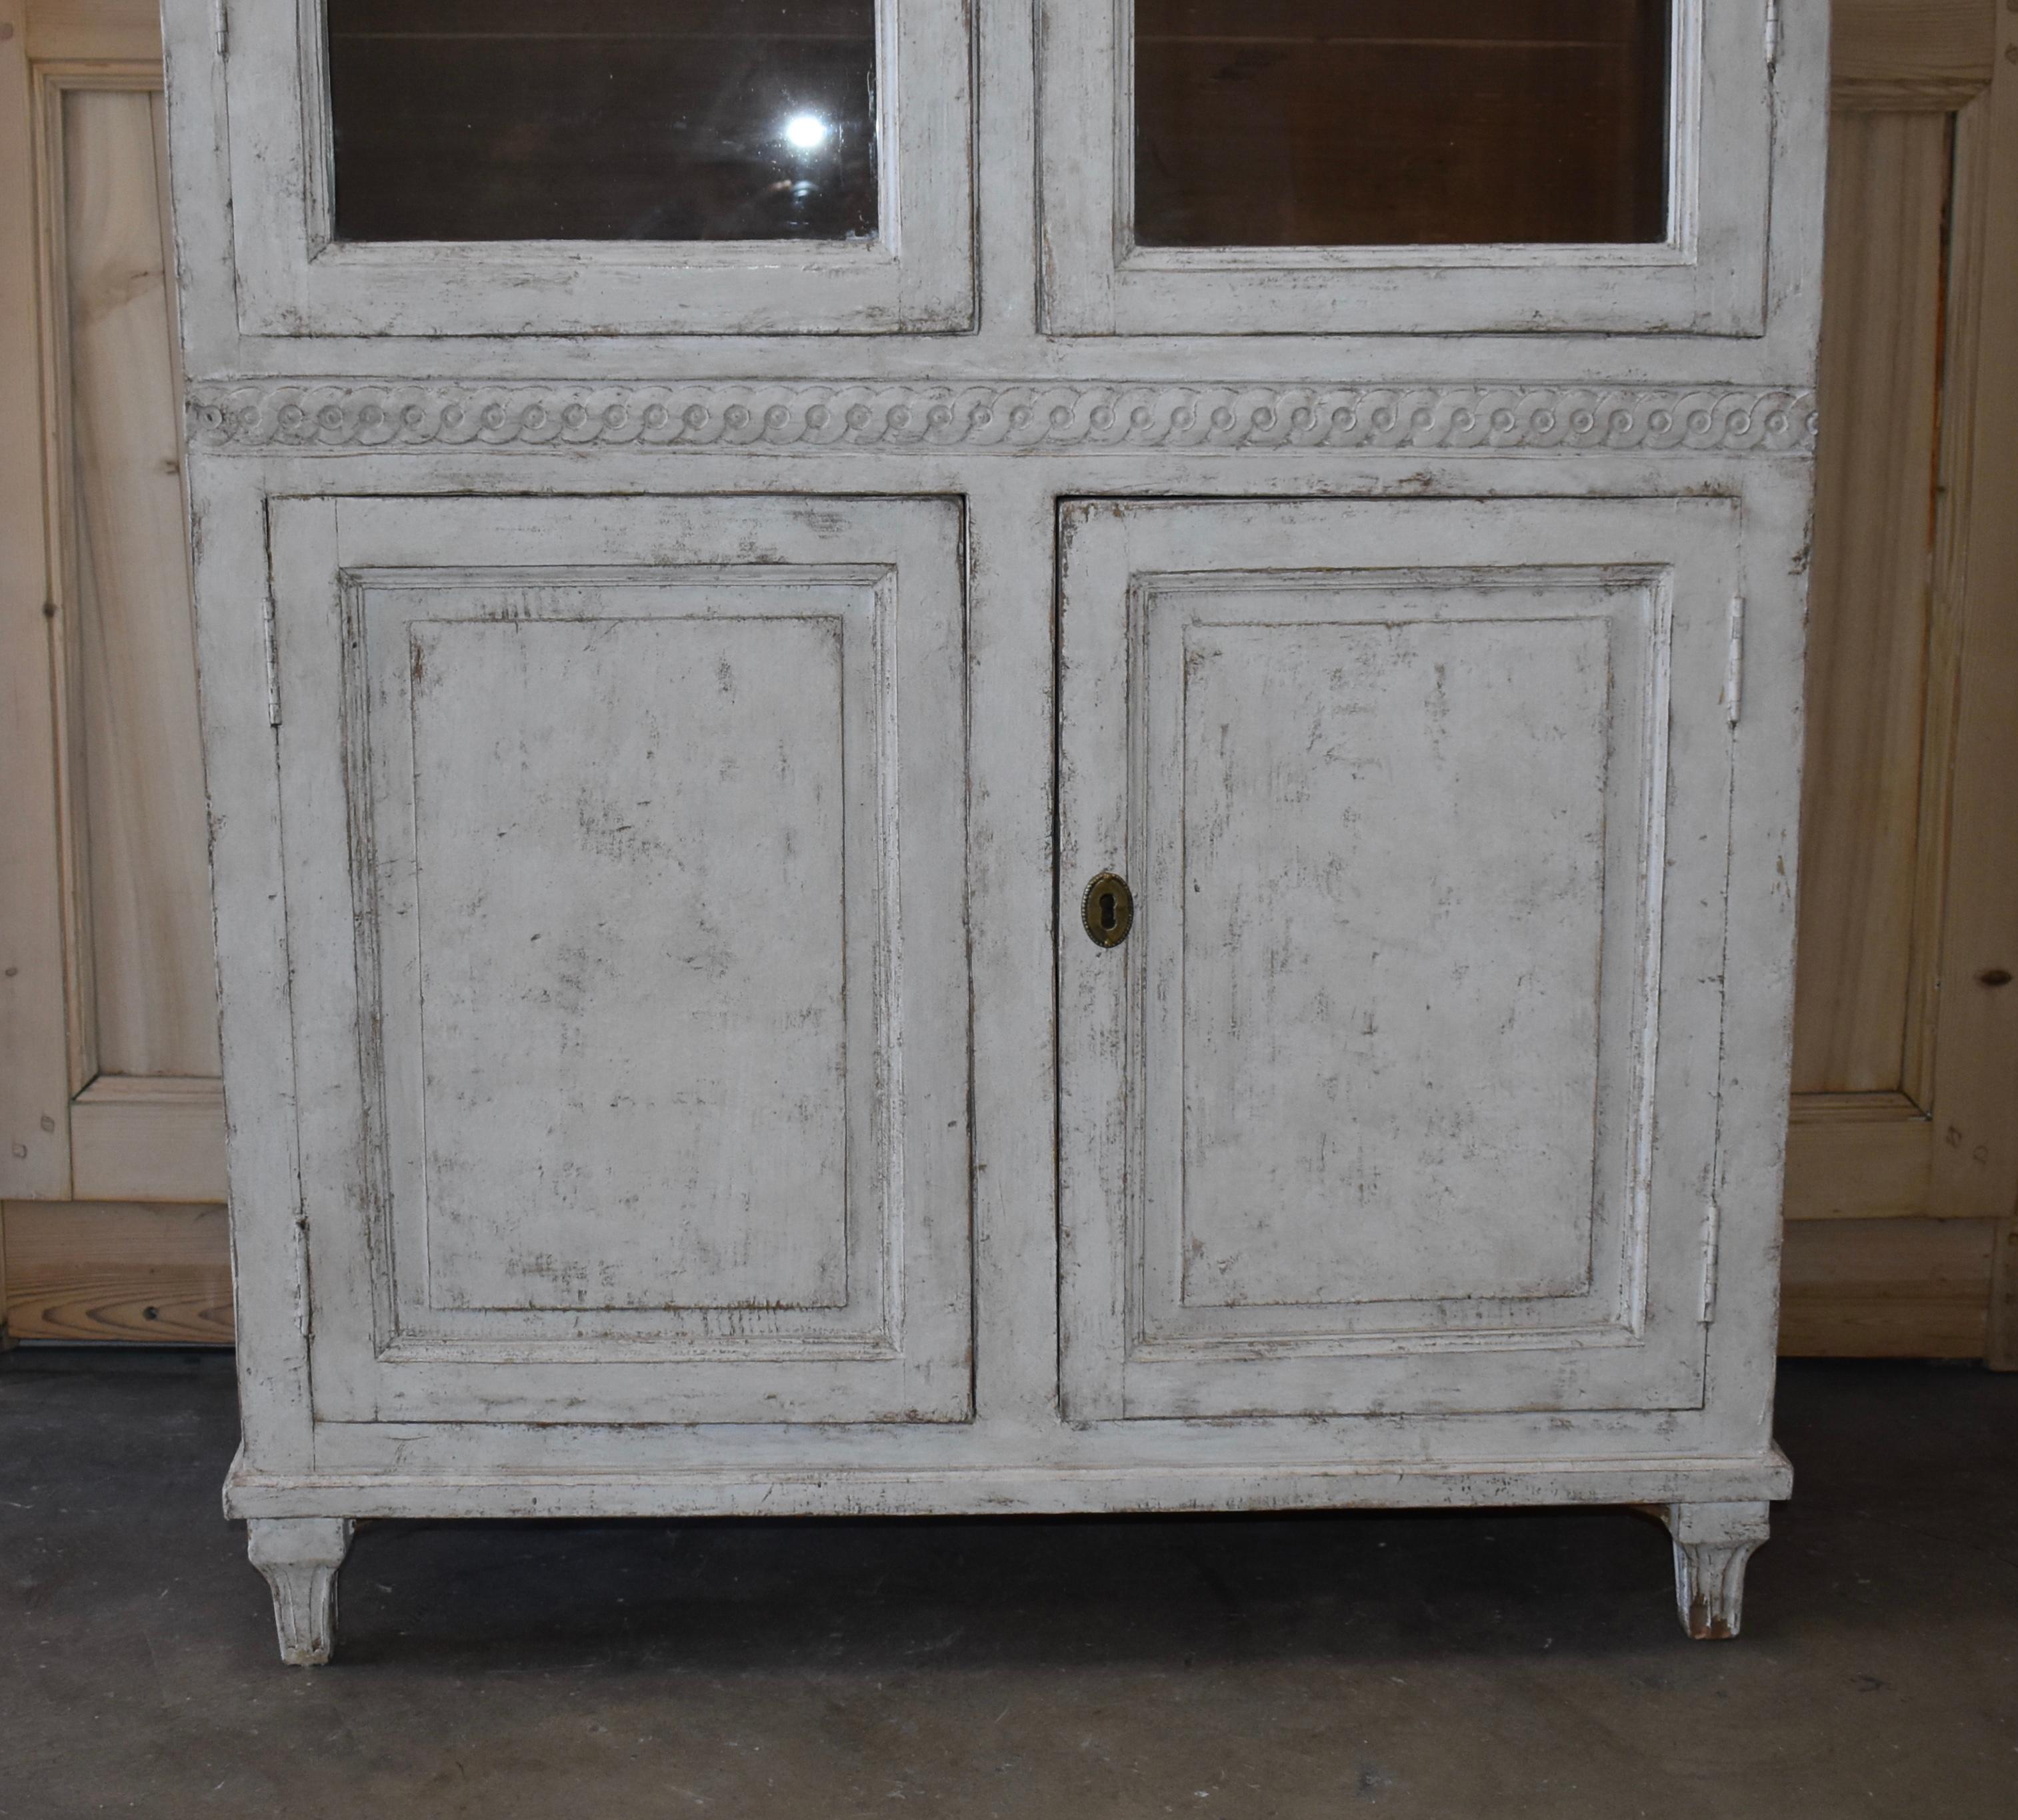 19th century Swedish glass front library cupboard with original glass and carved detail. In the Interior are 2 shelves for storage. Lovely Swedish grey/white color.